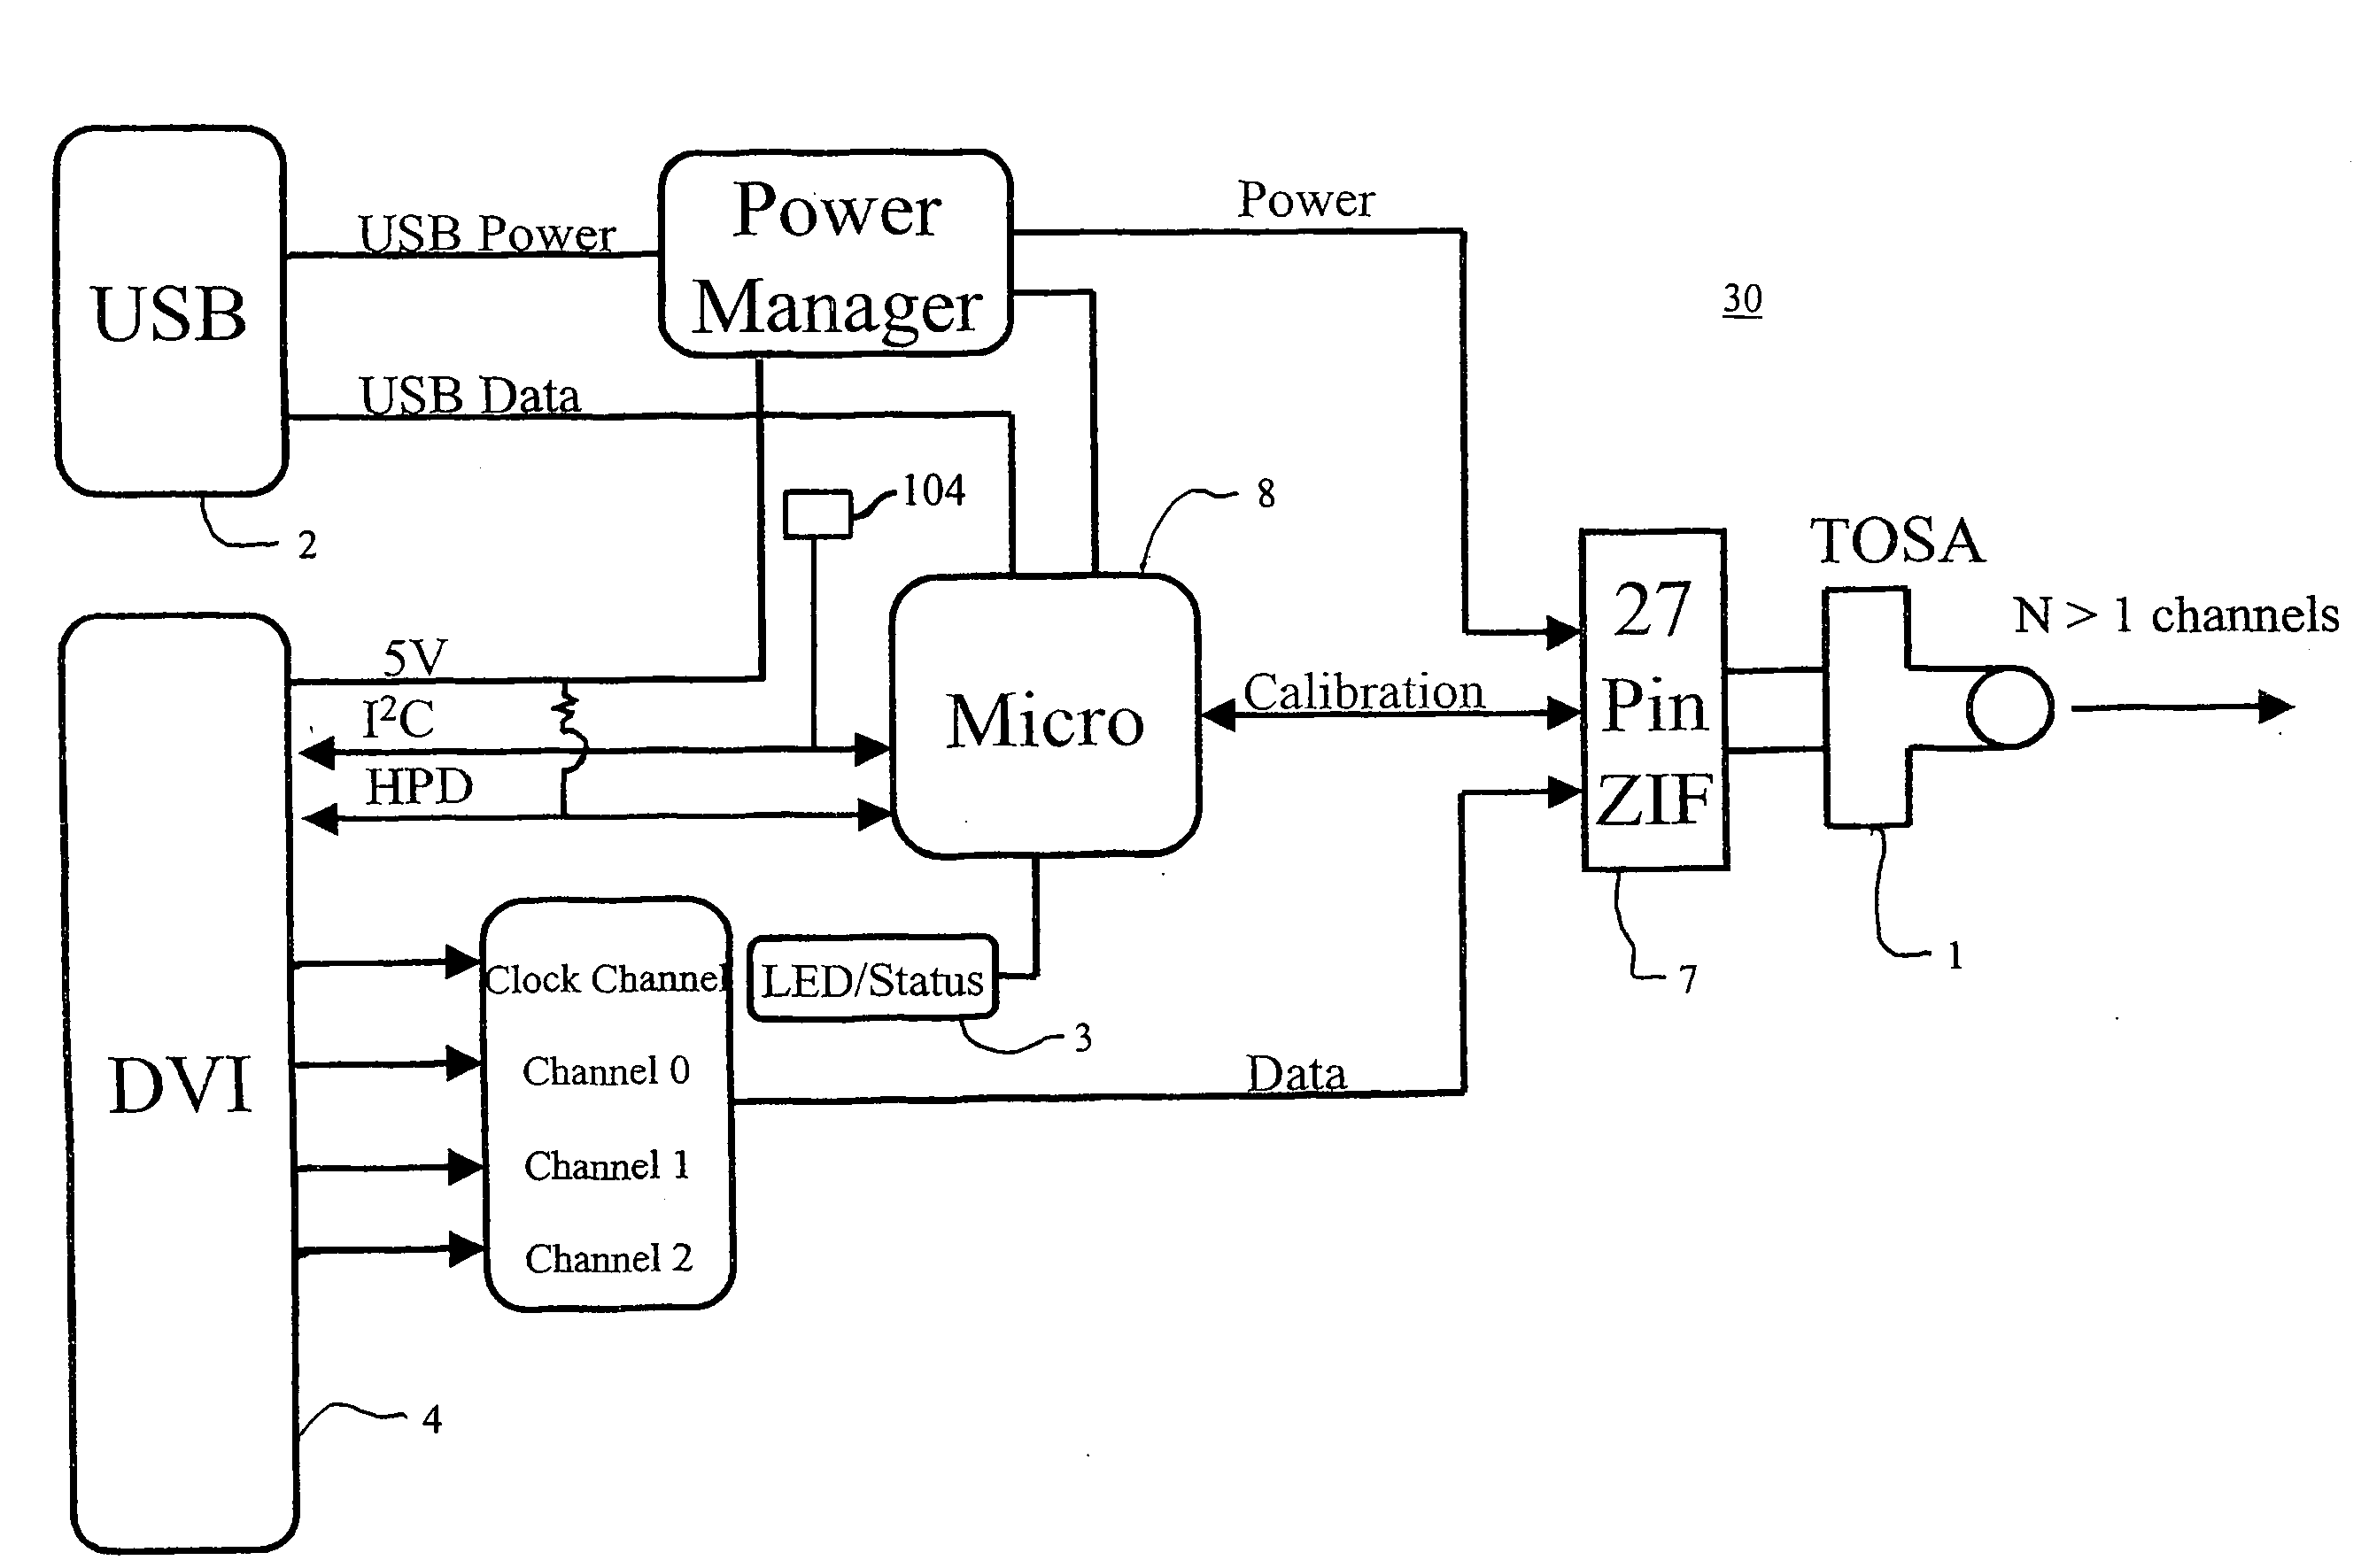 Device for transmitting and receiving DVI video over a single fiber optic interconnect